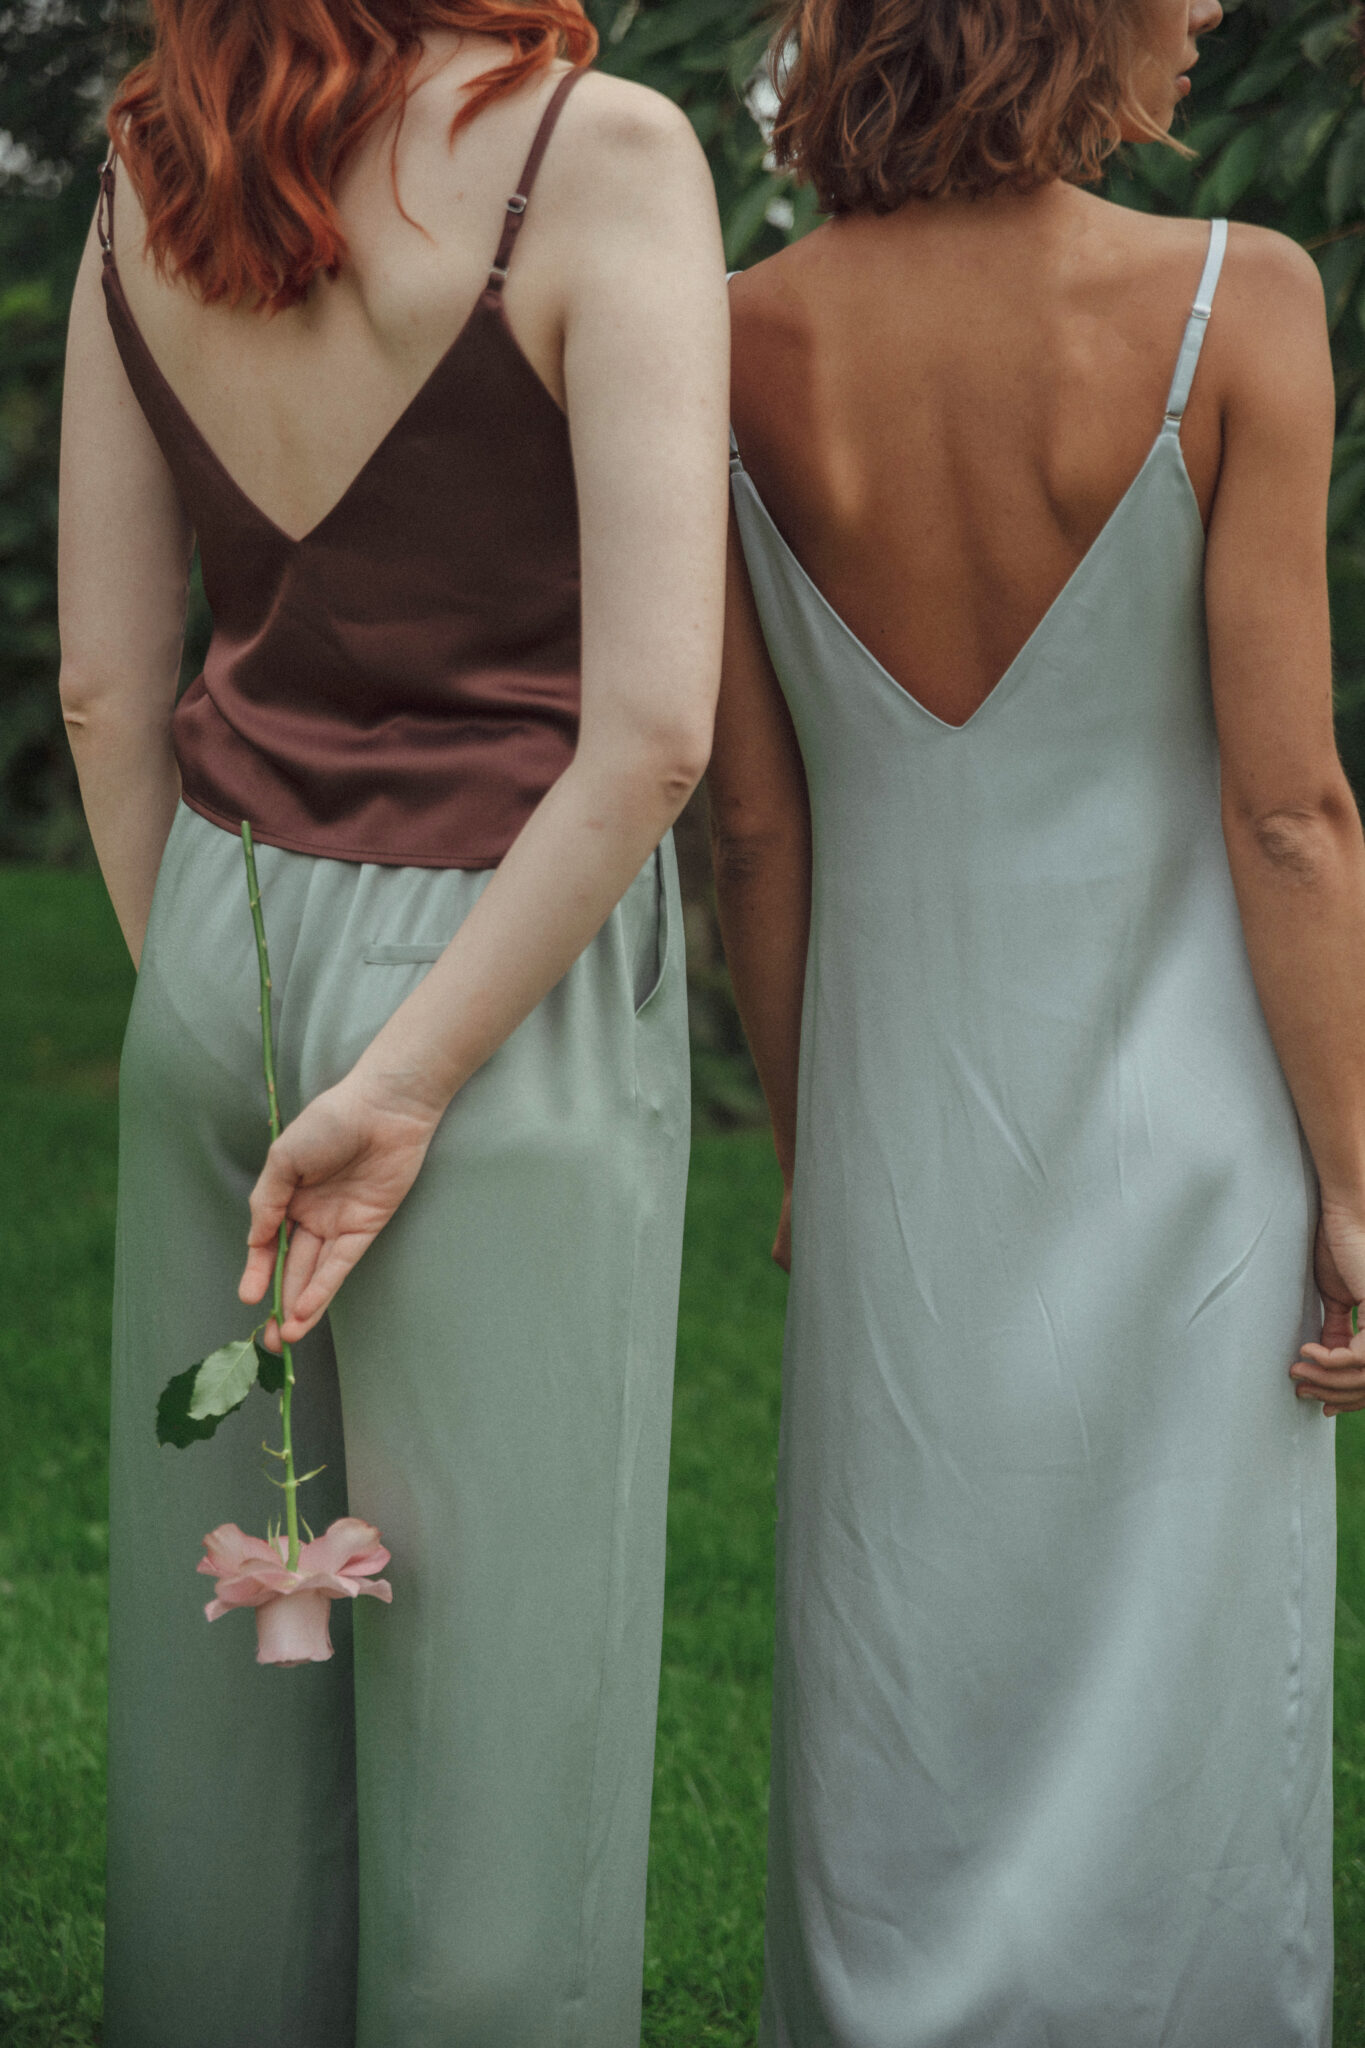 two girls from the back in silk clothing, one holding a flower